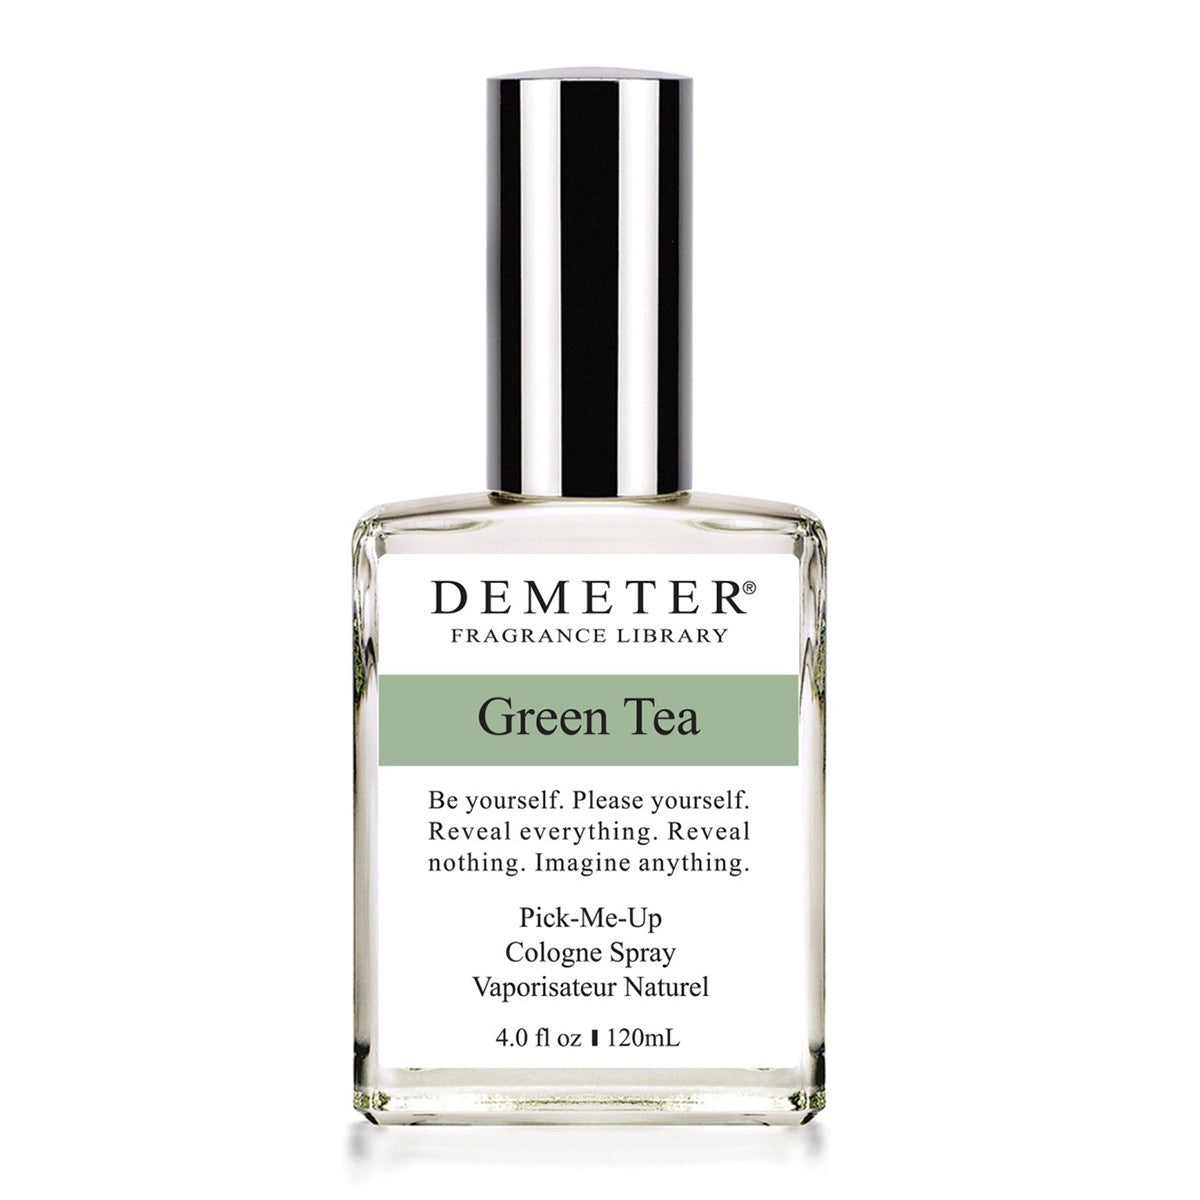 Primary image of Green Tea Cologne Spray